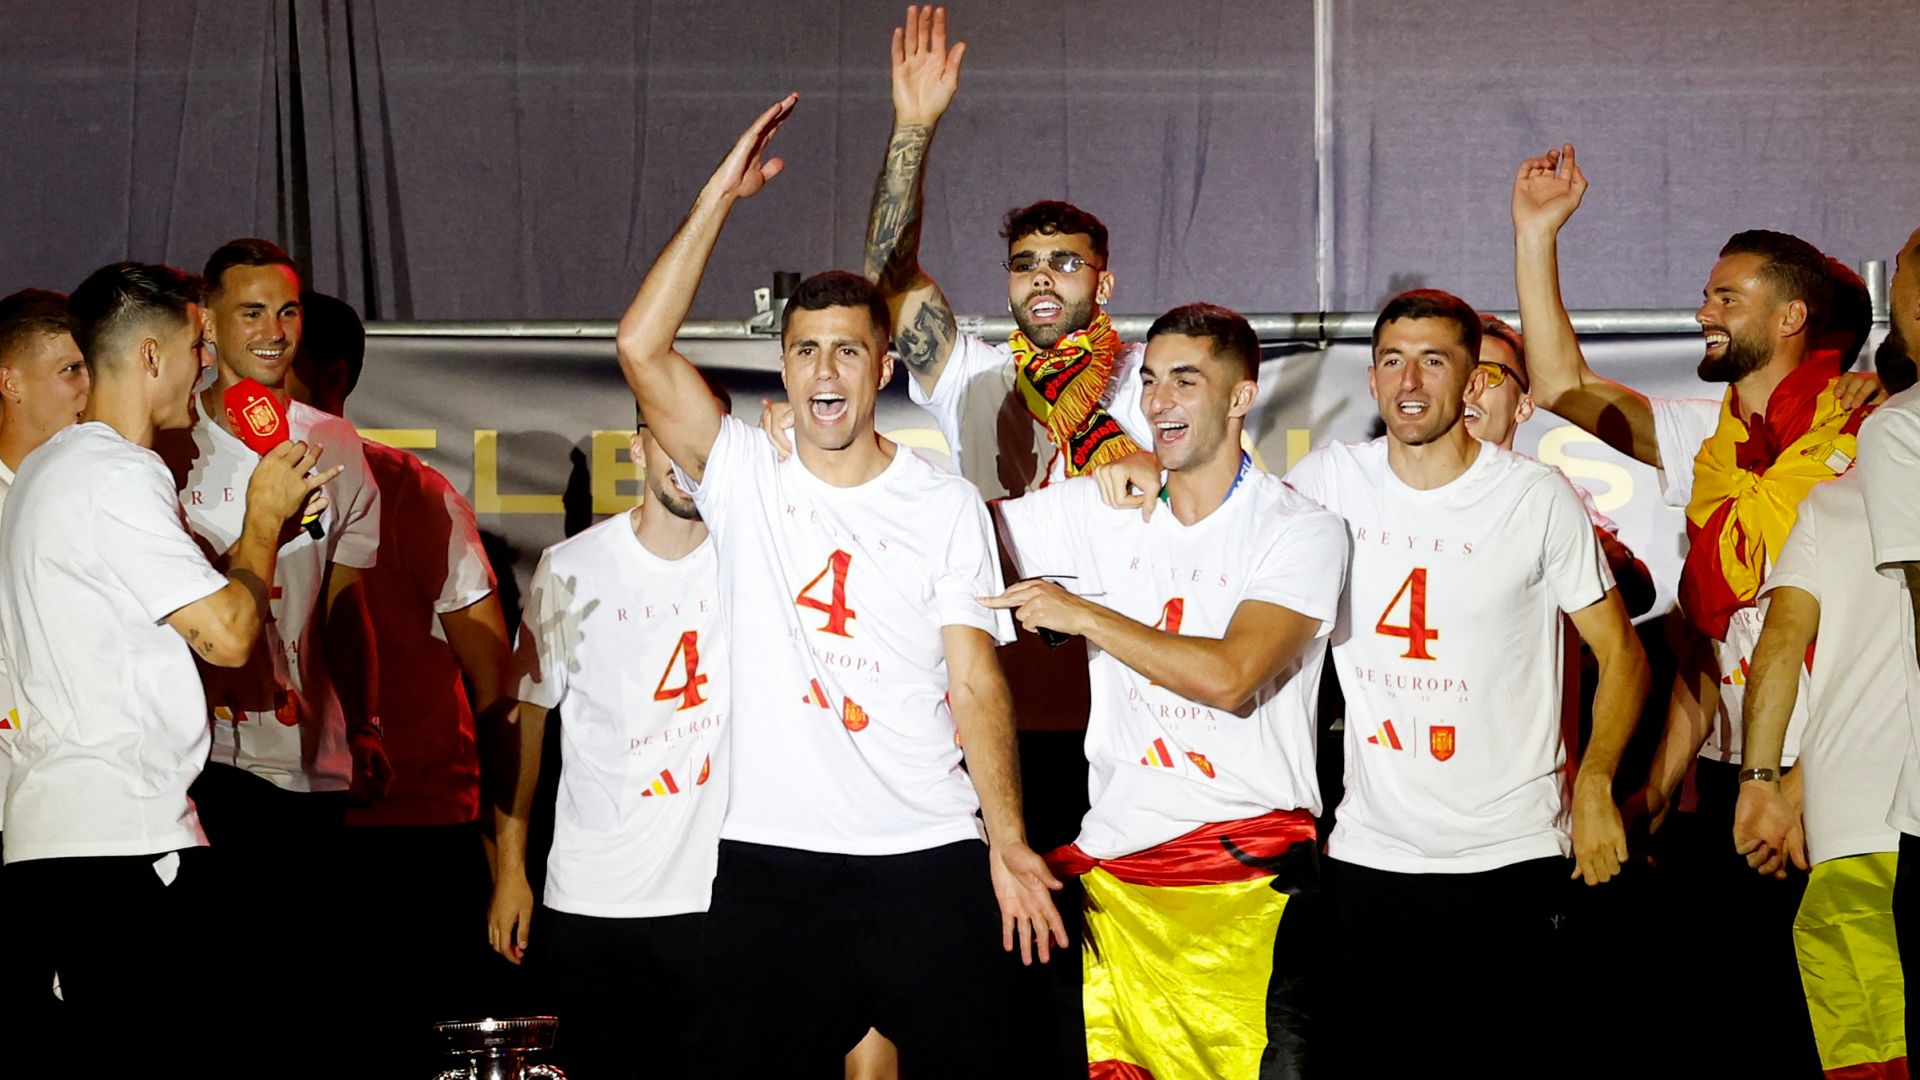 Gibraltar accuses Spanish players of 'hugely offensive' remarks during Euro 2024 celebrations